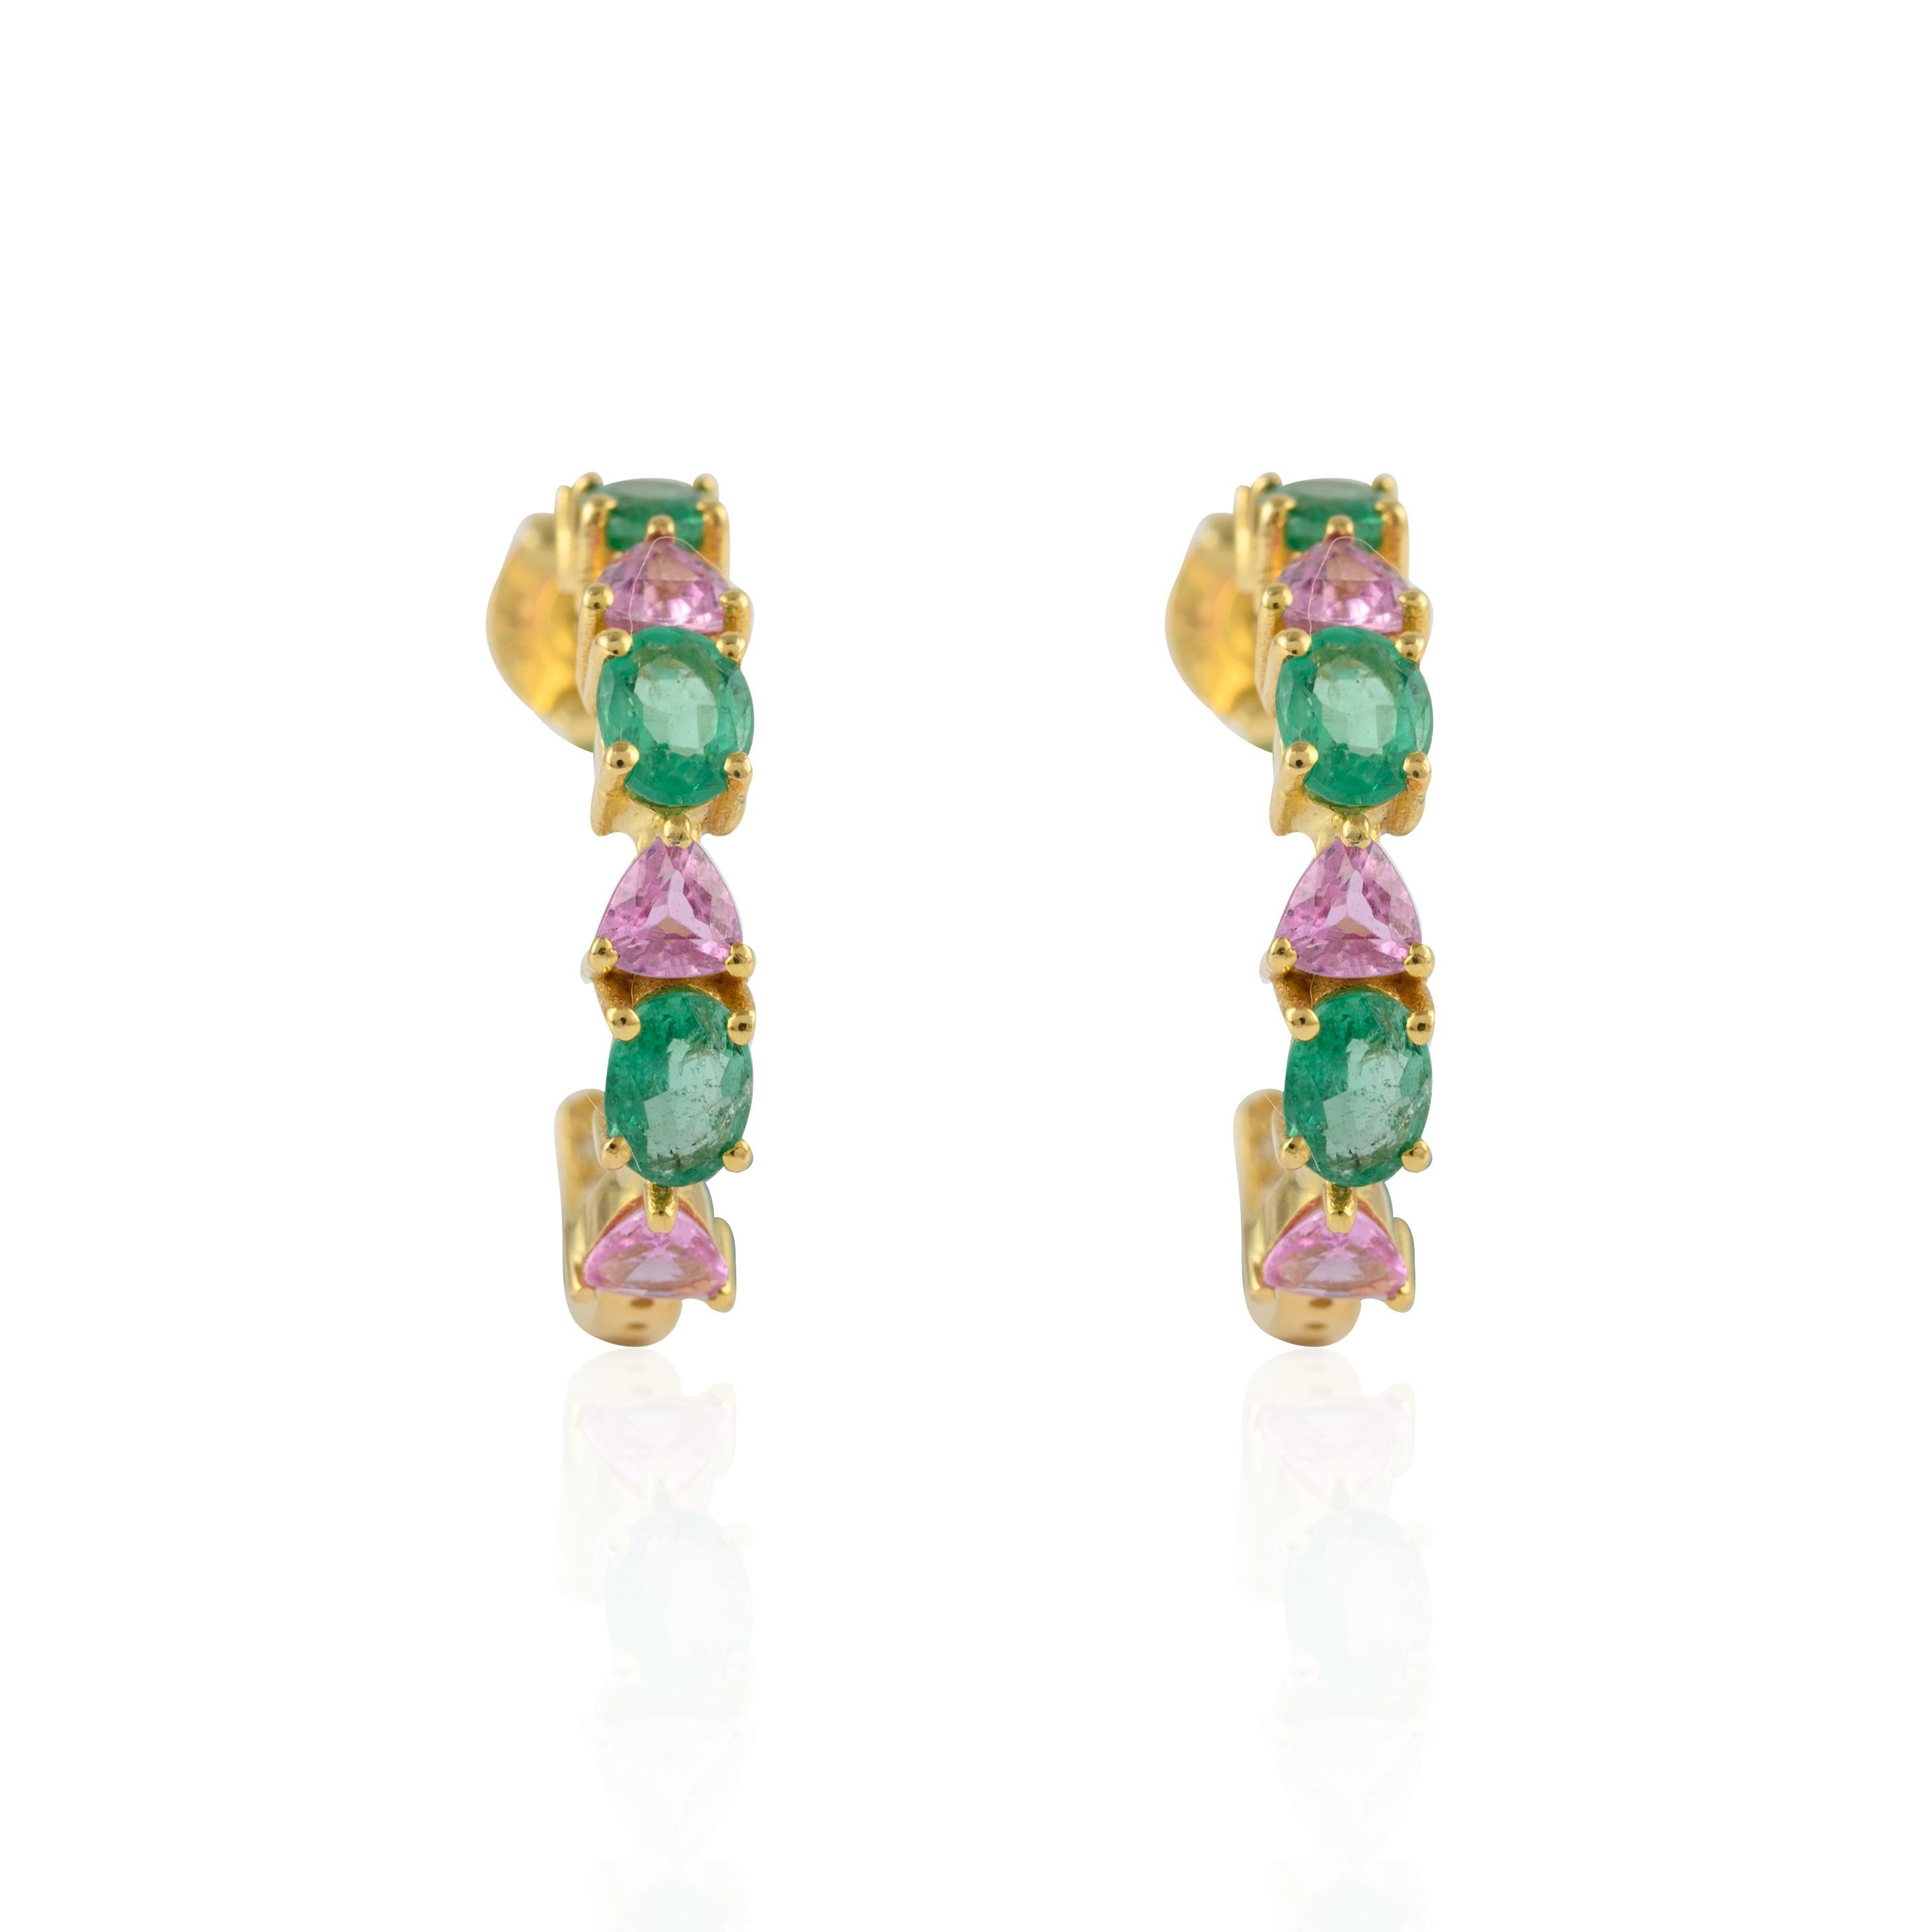 Modernist Minimalist 1.94 Carat Emerald Pink Sapphire Hoops Earring 14k Solid Yellow Gold For Sale